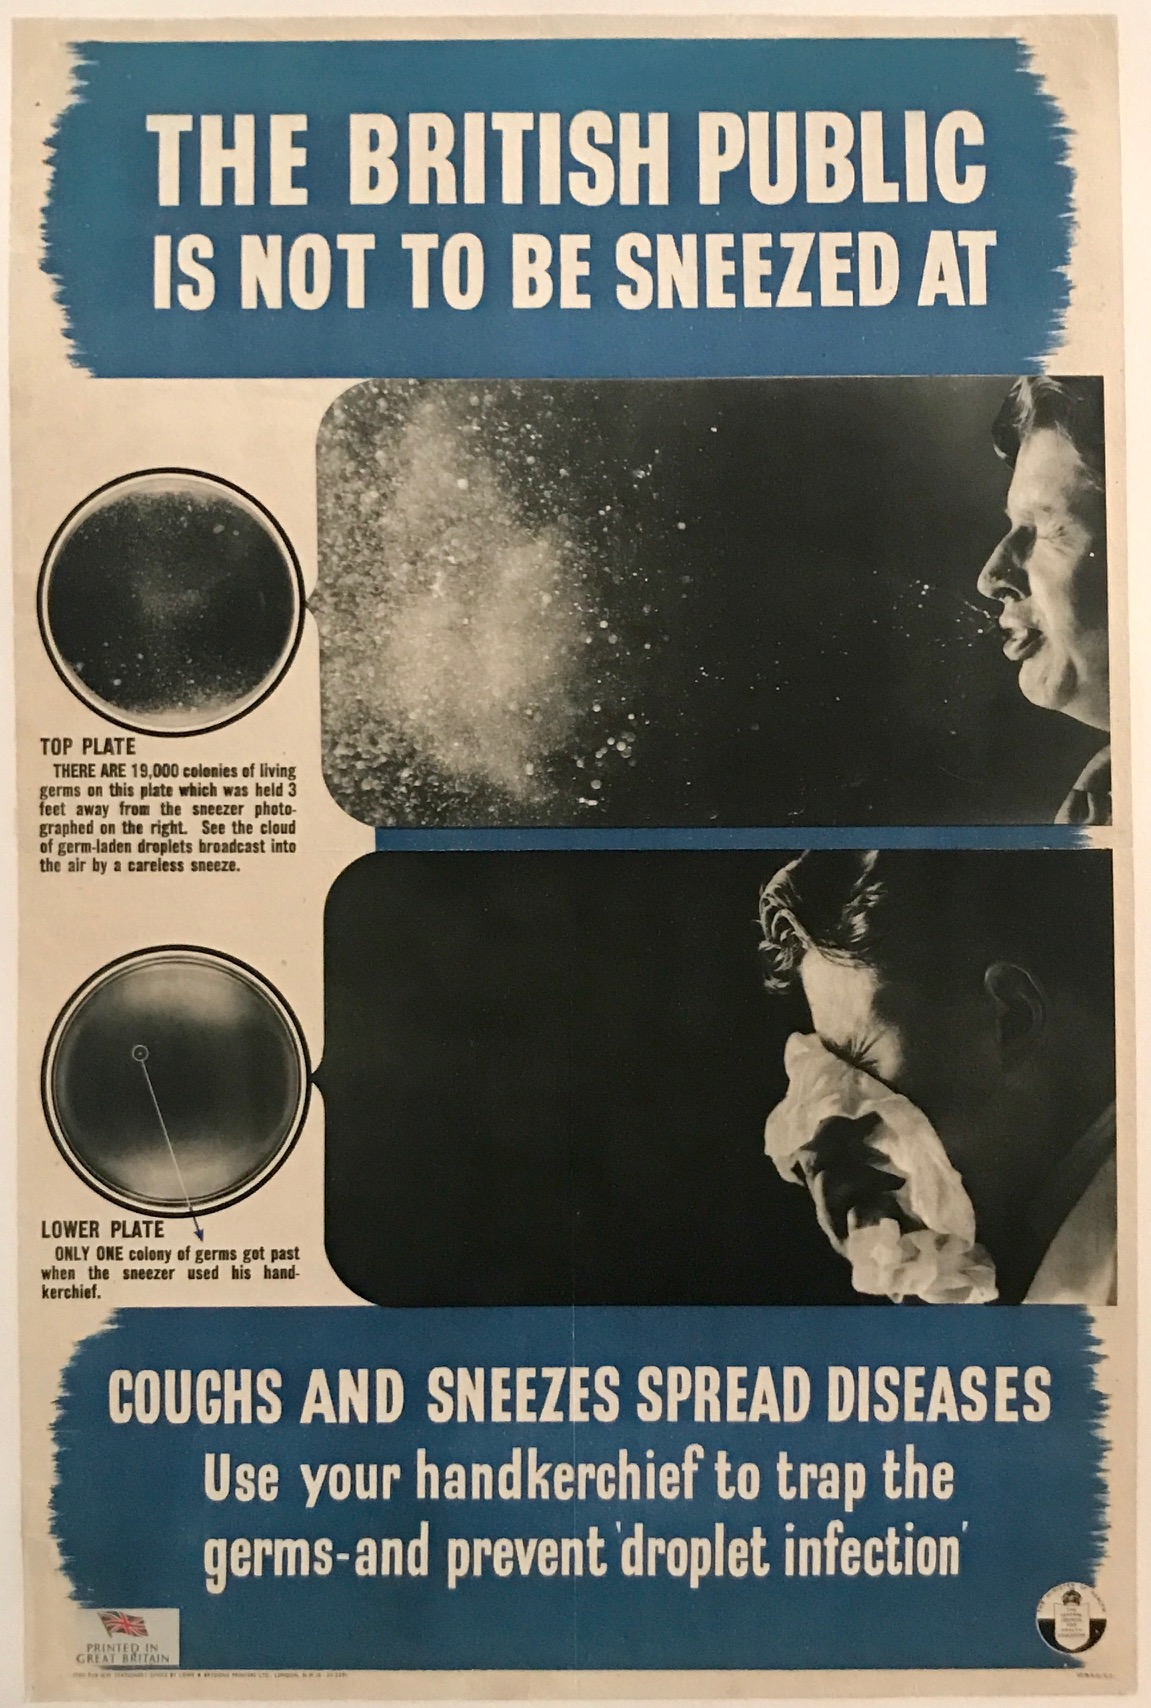 photomontage poster of a man first sneezing into the air and then a handkerchief